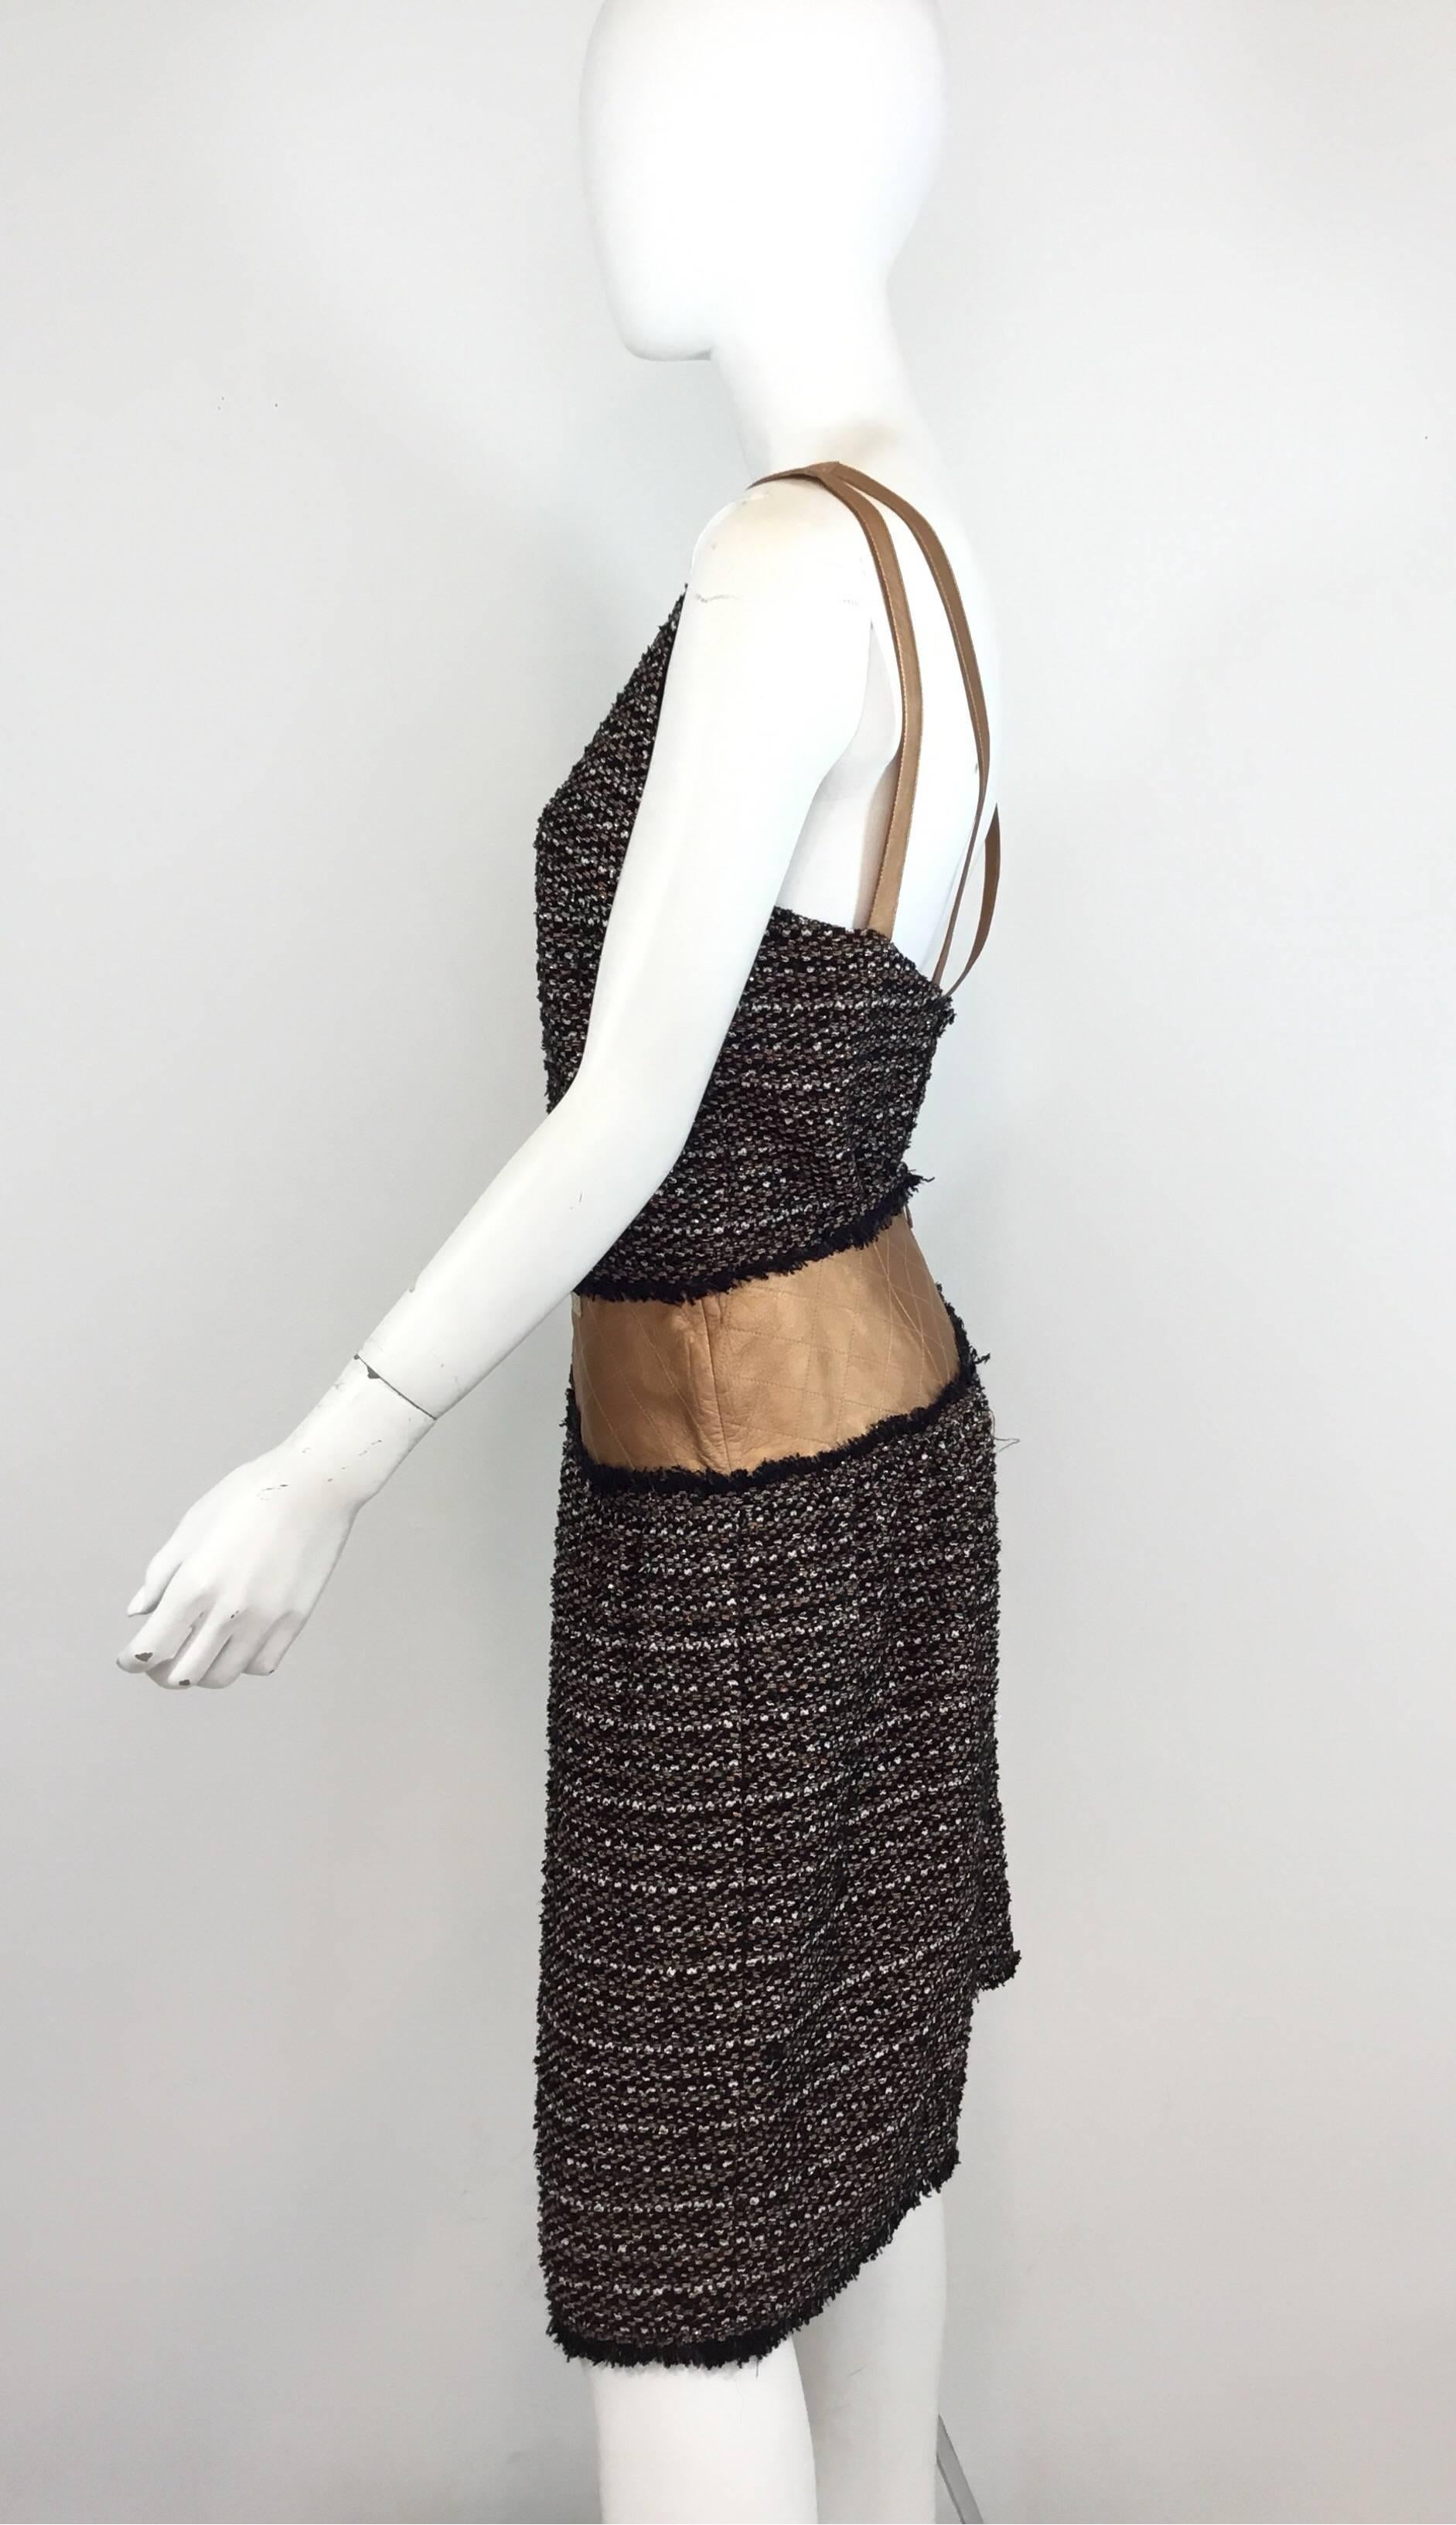 Chanel fantasy tweed skirt set from 2005 A collection. Skirt features a copper metallic leather trimmed waist, back zipper closure, and full lining. Top has a V-neckline, leather straps, back button closures, and full lining. Excellent condition.